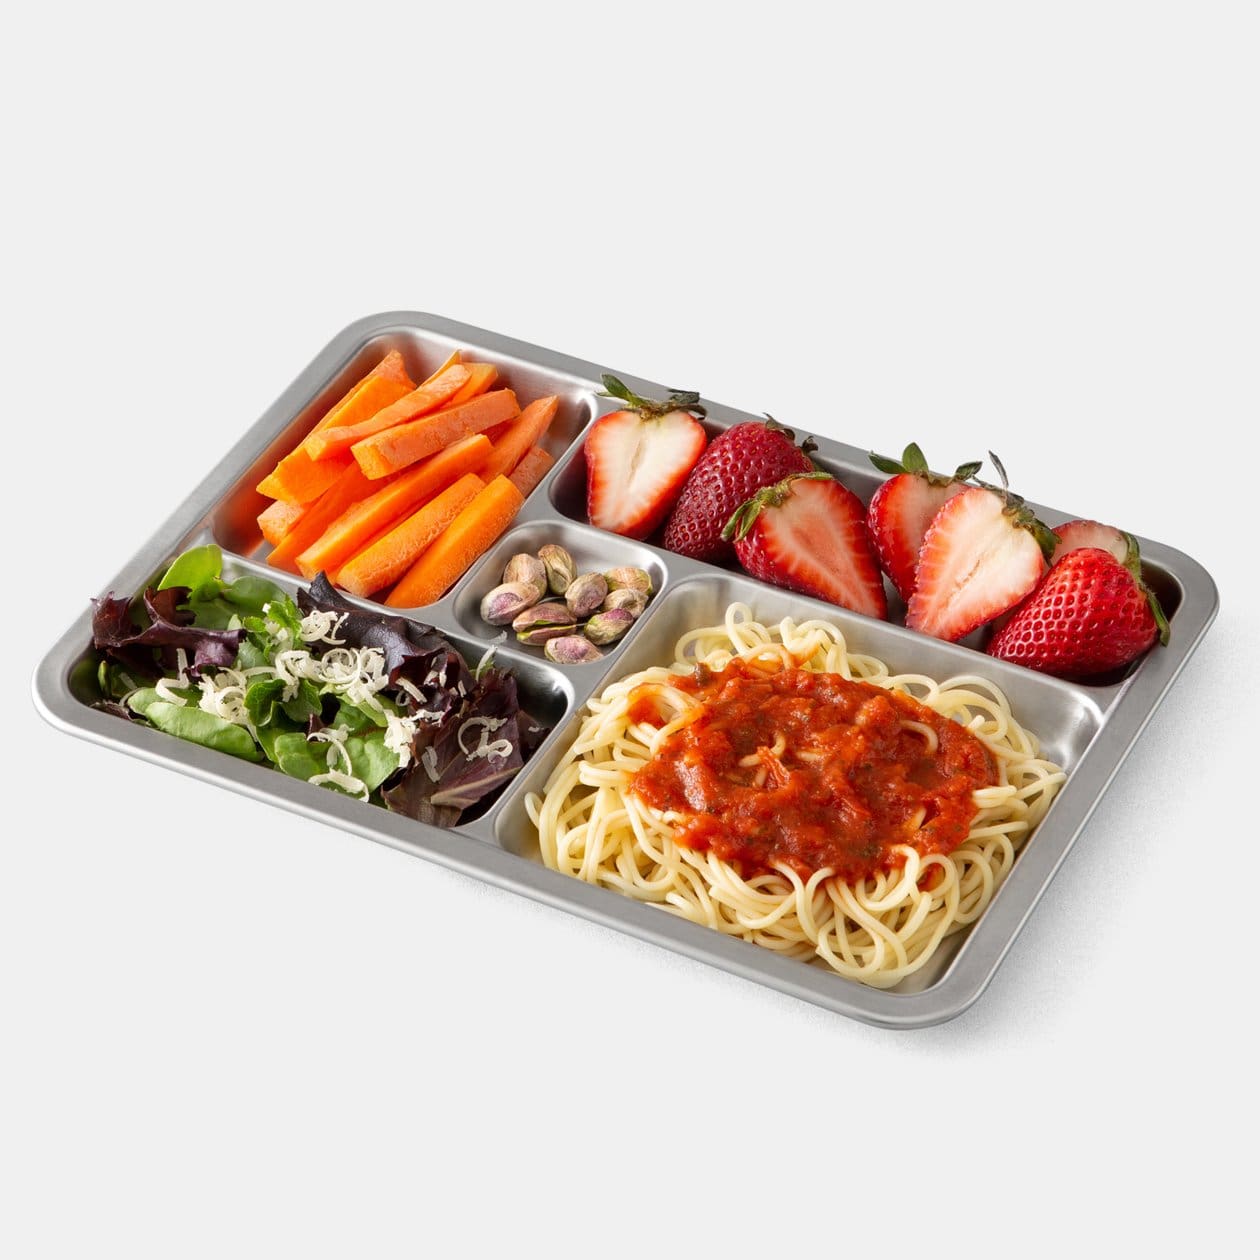 Bento School Lunches : 3 Lunches in Planetbox Rover